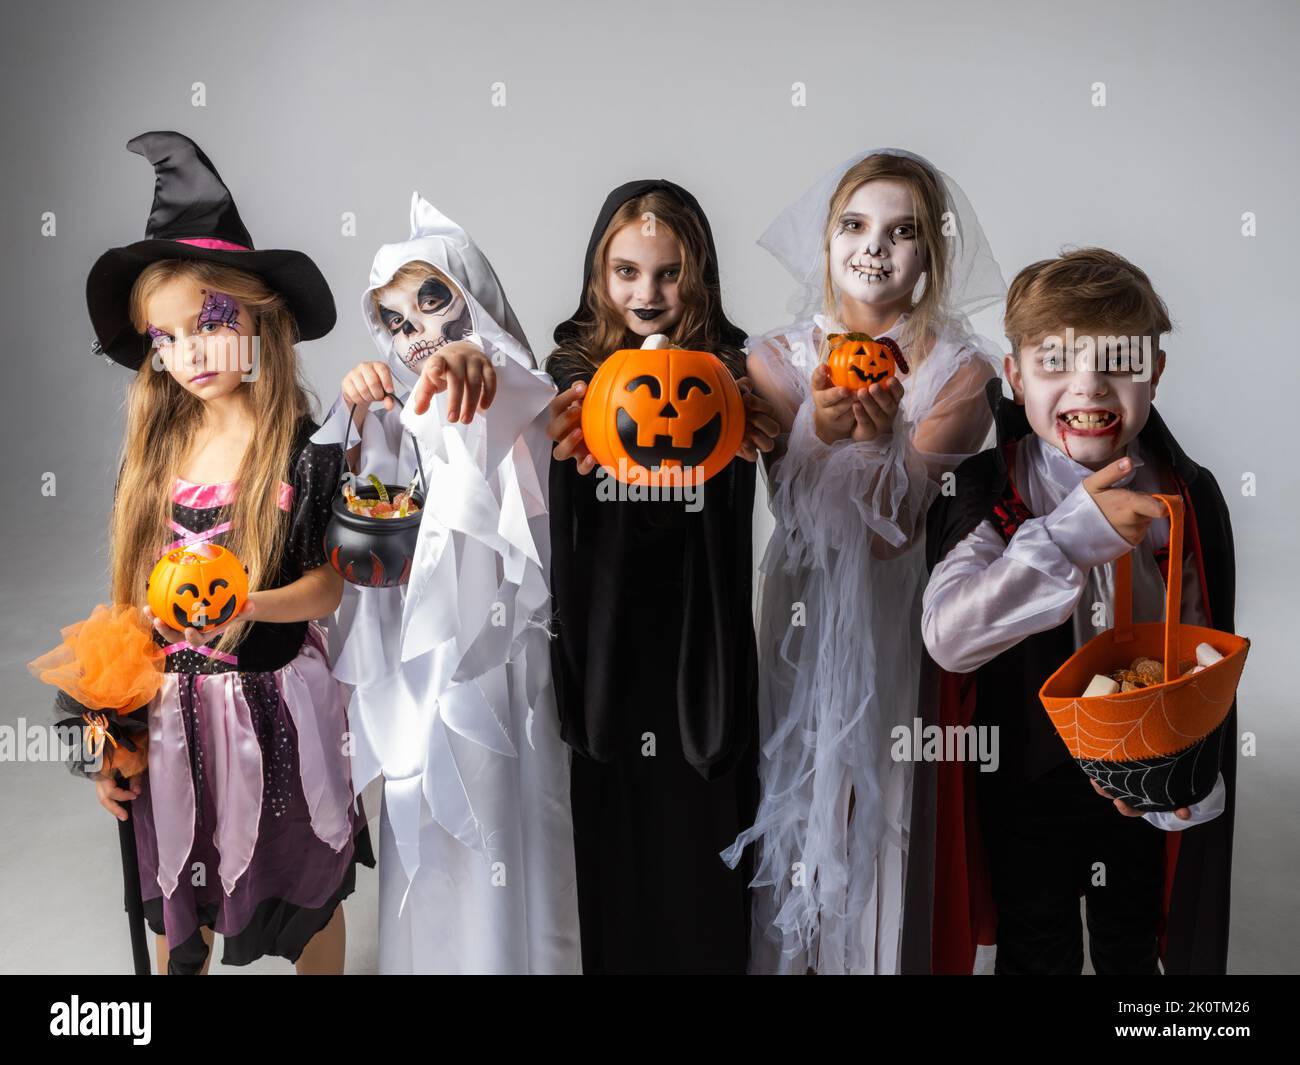 Group of children in costumes holding sweets at Halloween party Stock Photo